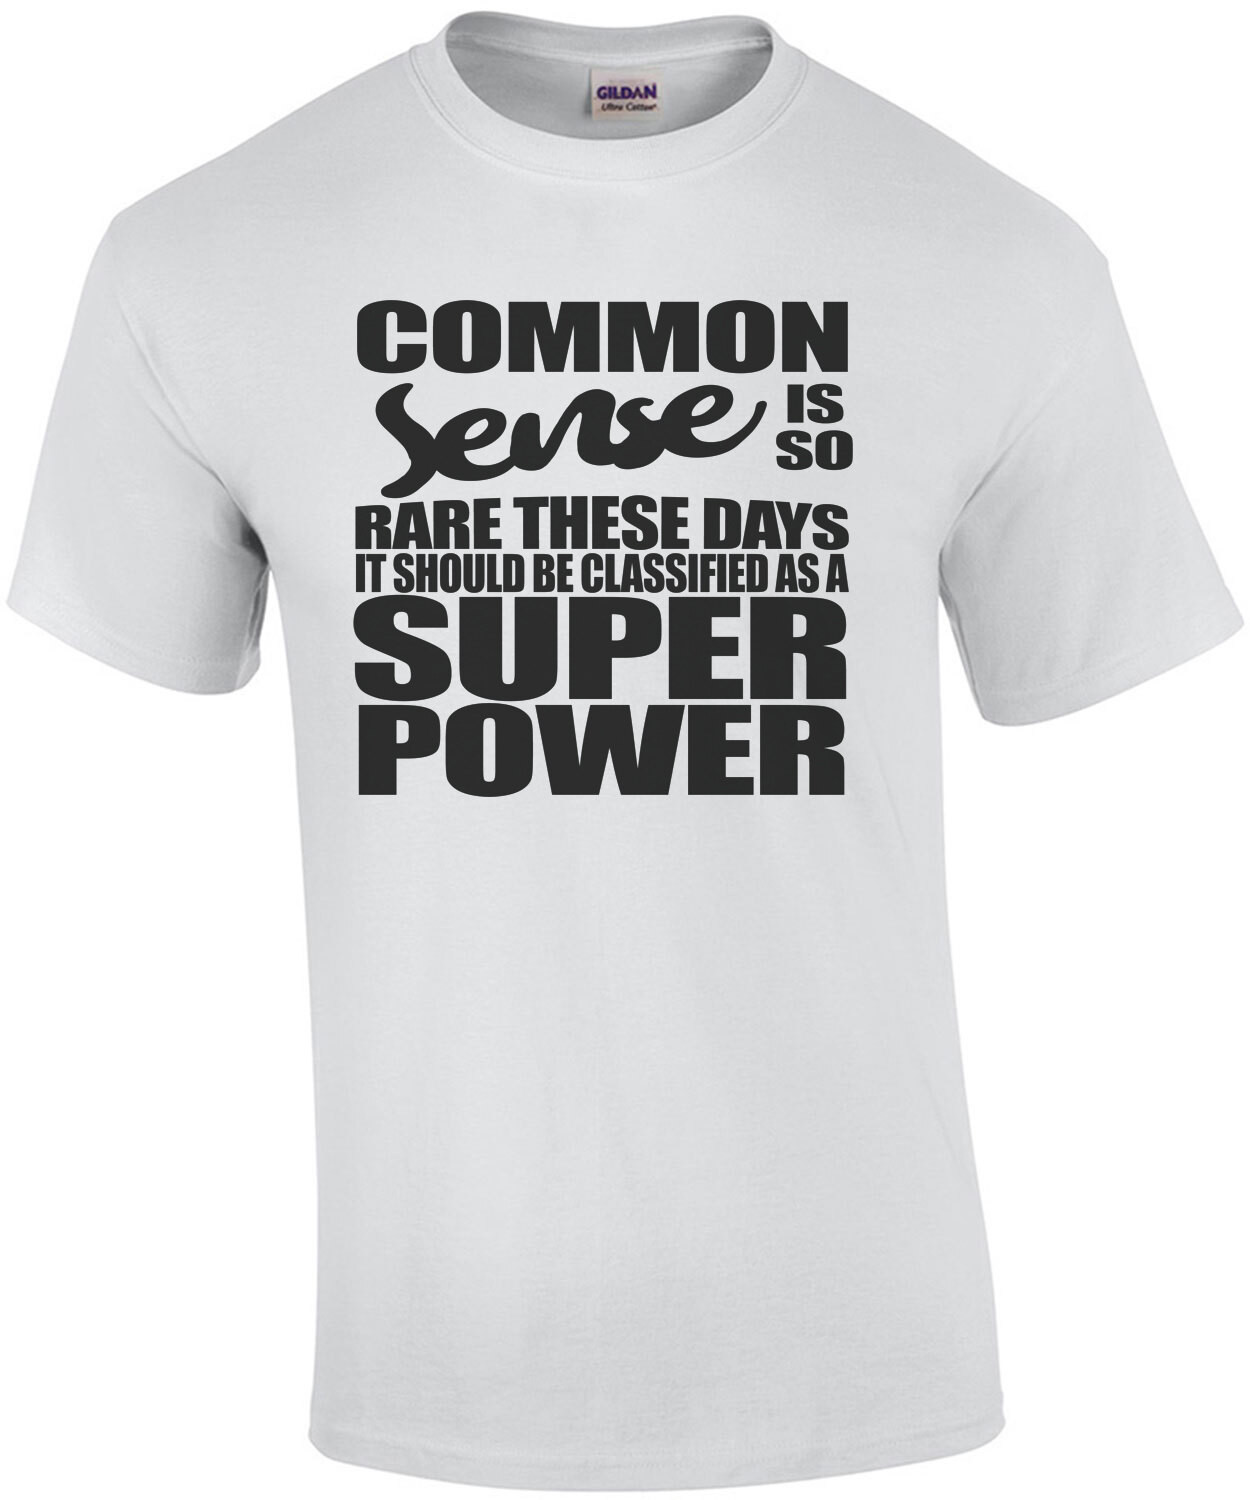 Common Sense is so rare these days it should be classified as a super power - sarcastic t-shirt